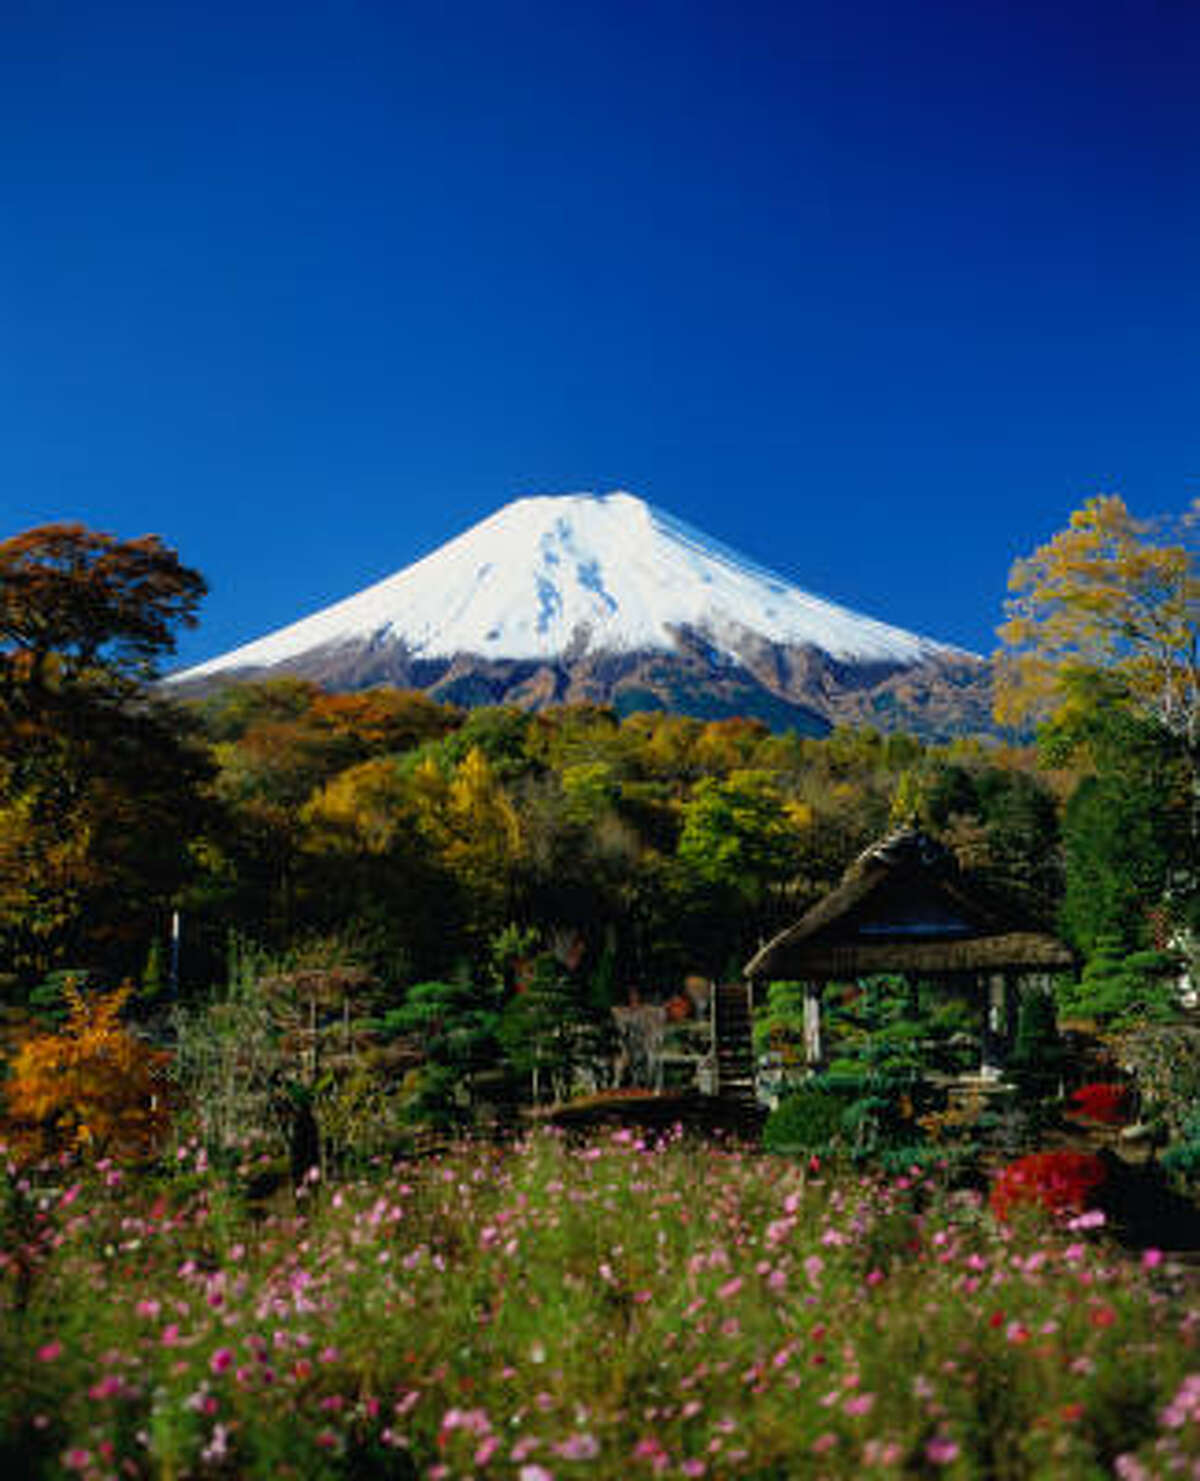 Savor Mount Fuji in full by hiking the ancient, untraveled Yoshidaguchi Trail through primeval forests and past centuries-old shrines.